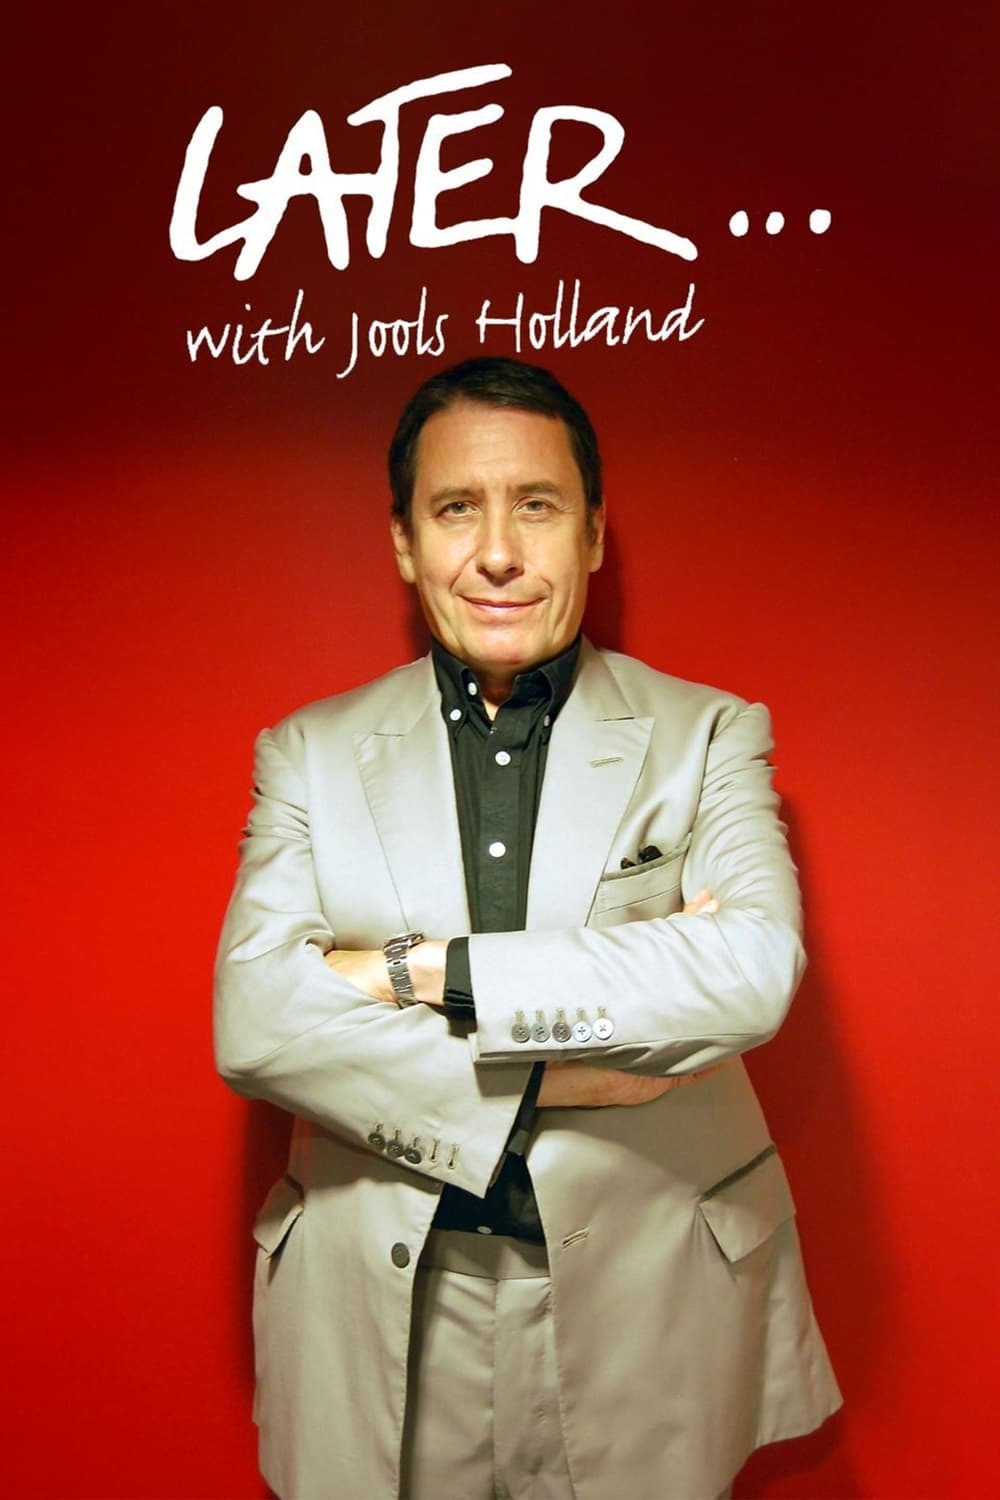 Later Live… with Jools Holland